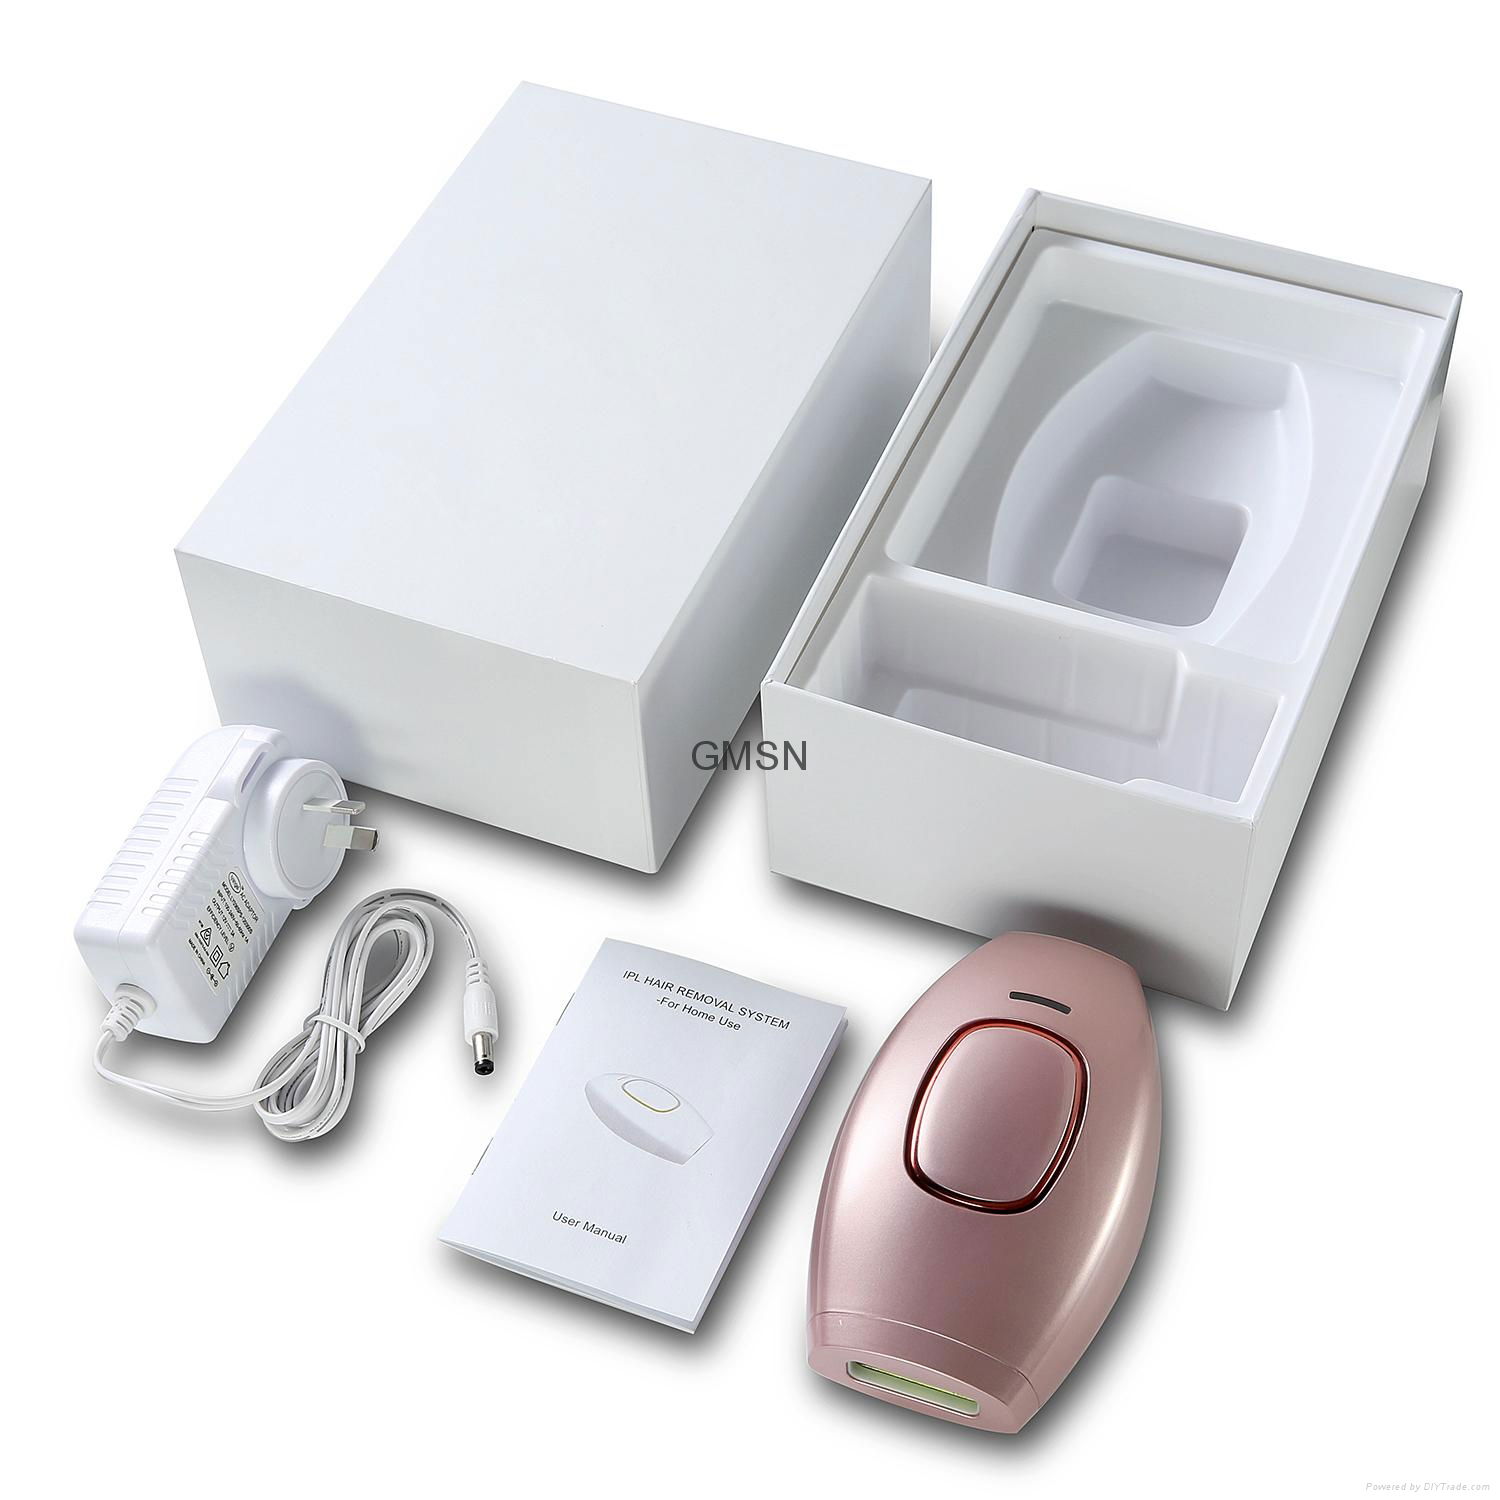 3 in 1 Newest ipl hair removal,ipl machine,hair removal ipl 3